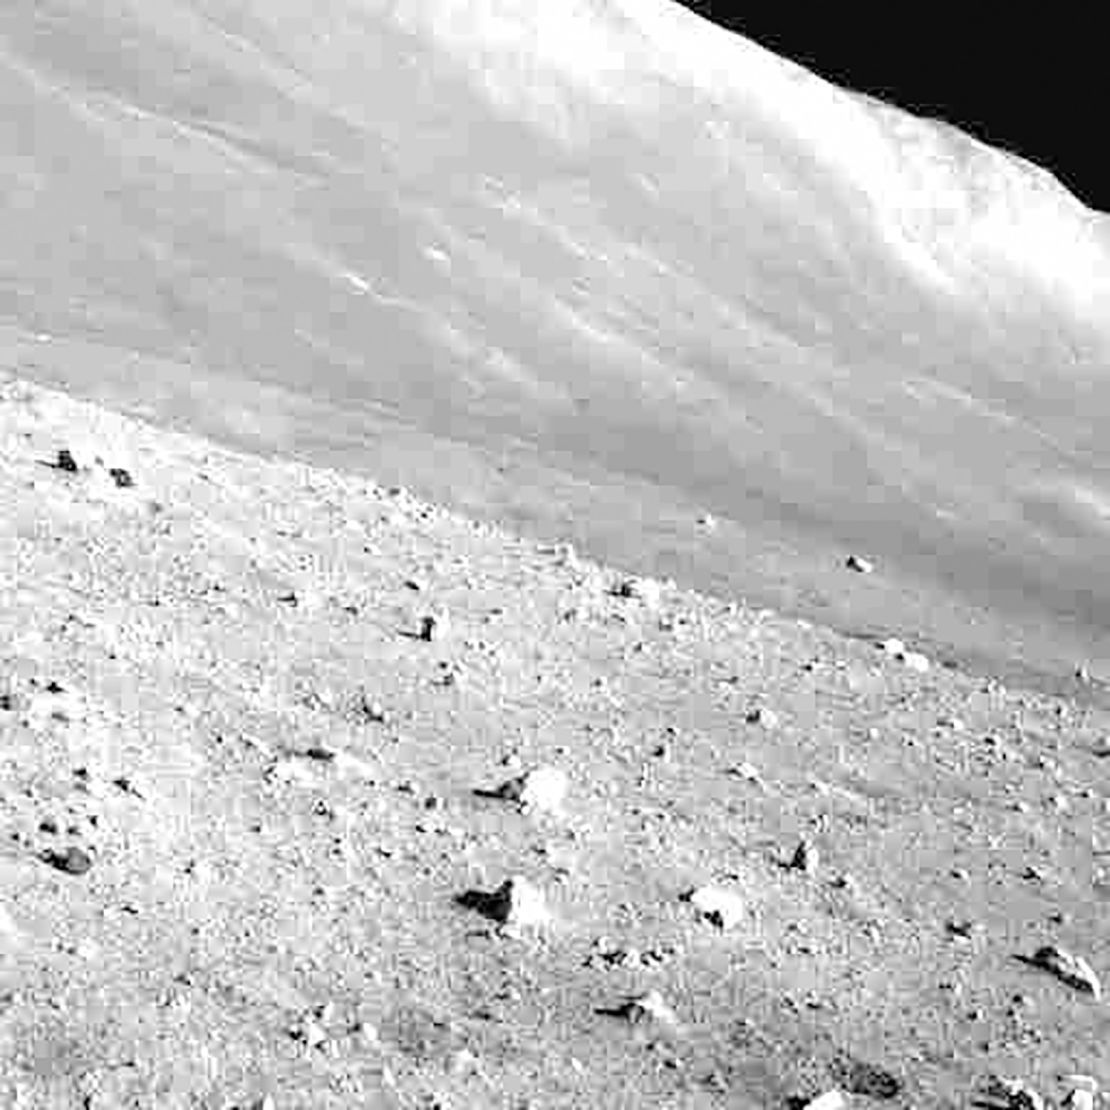 SLIM's navigation camera captured the bright conditions of lunar day shining on the landing site.